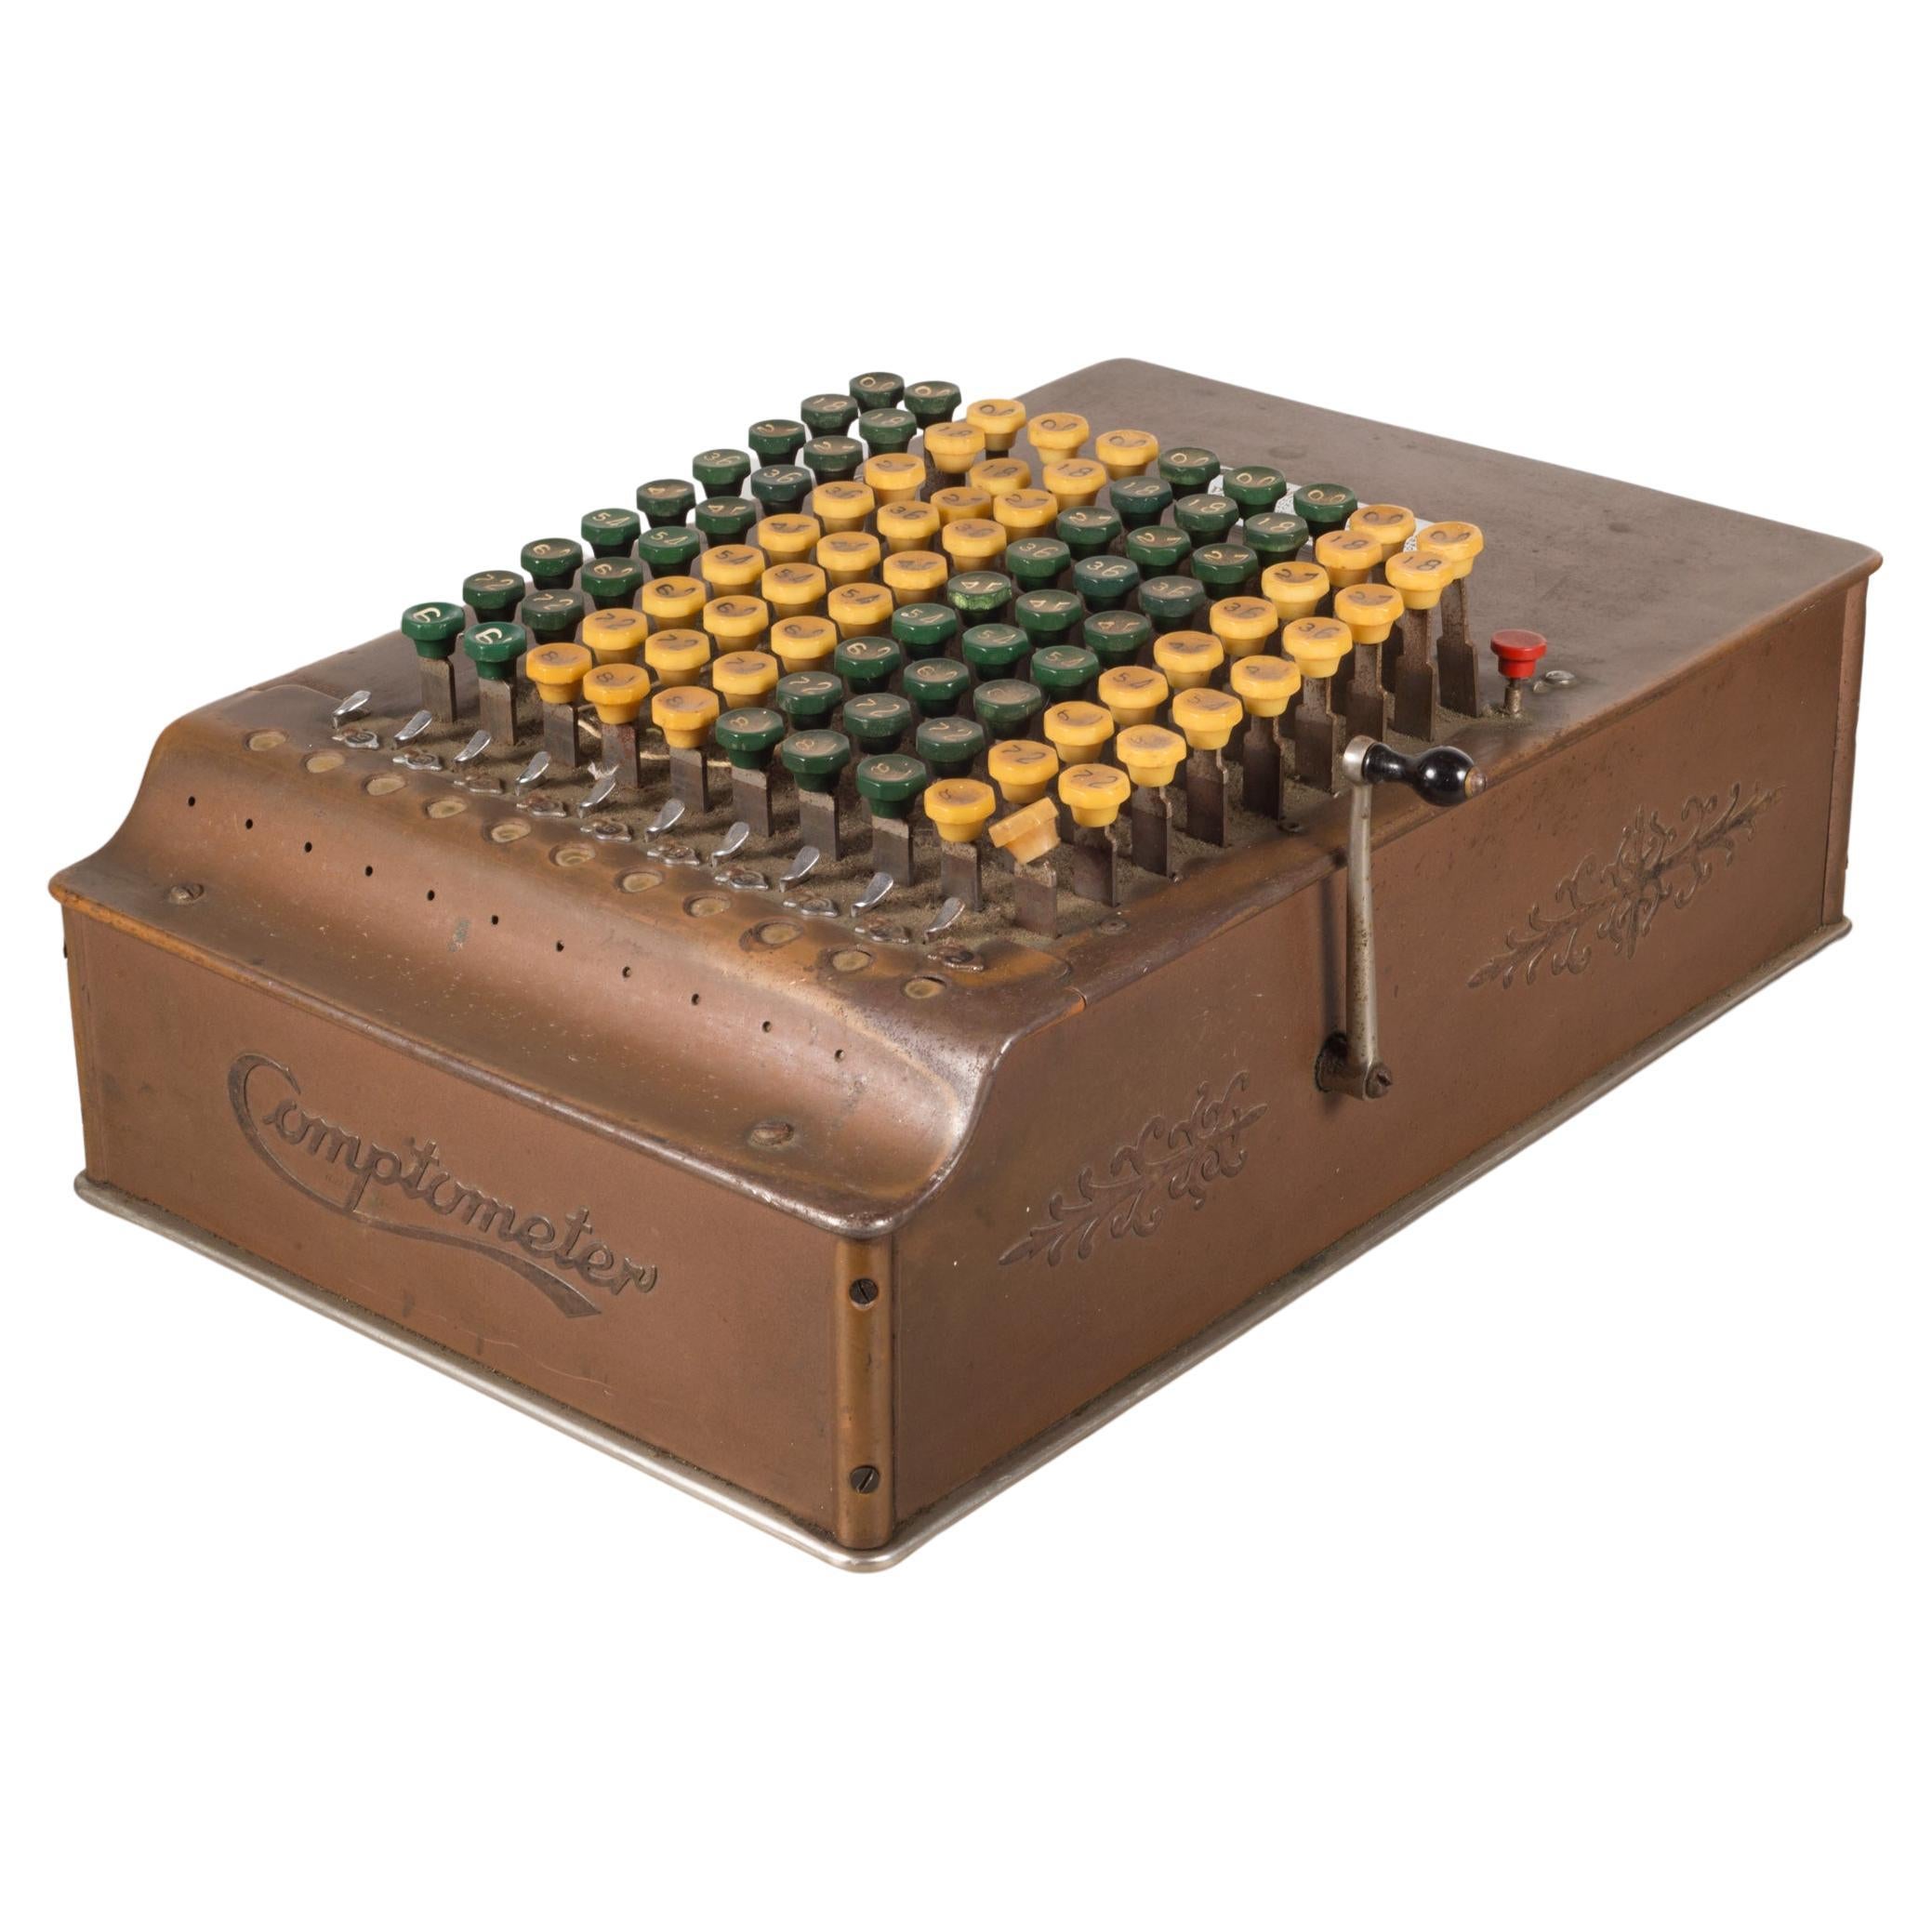 Early 19th-Early 20th C. Copper Adding Machine C.1887-1920  (FREE SHIPPING)